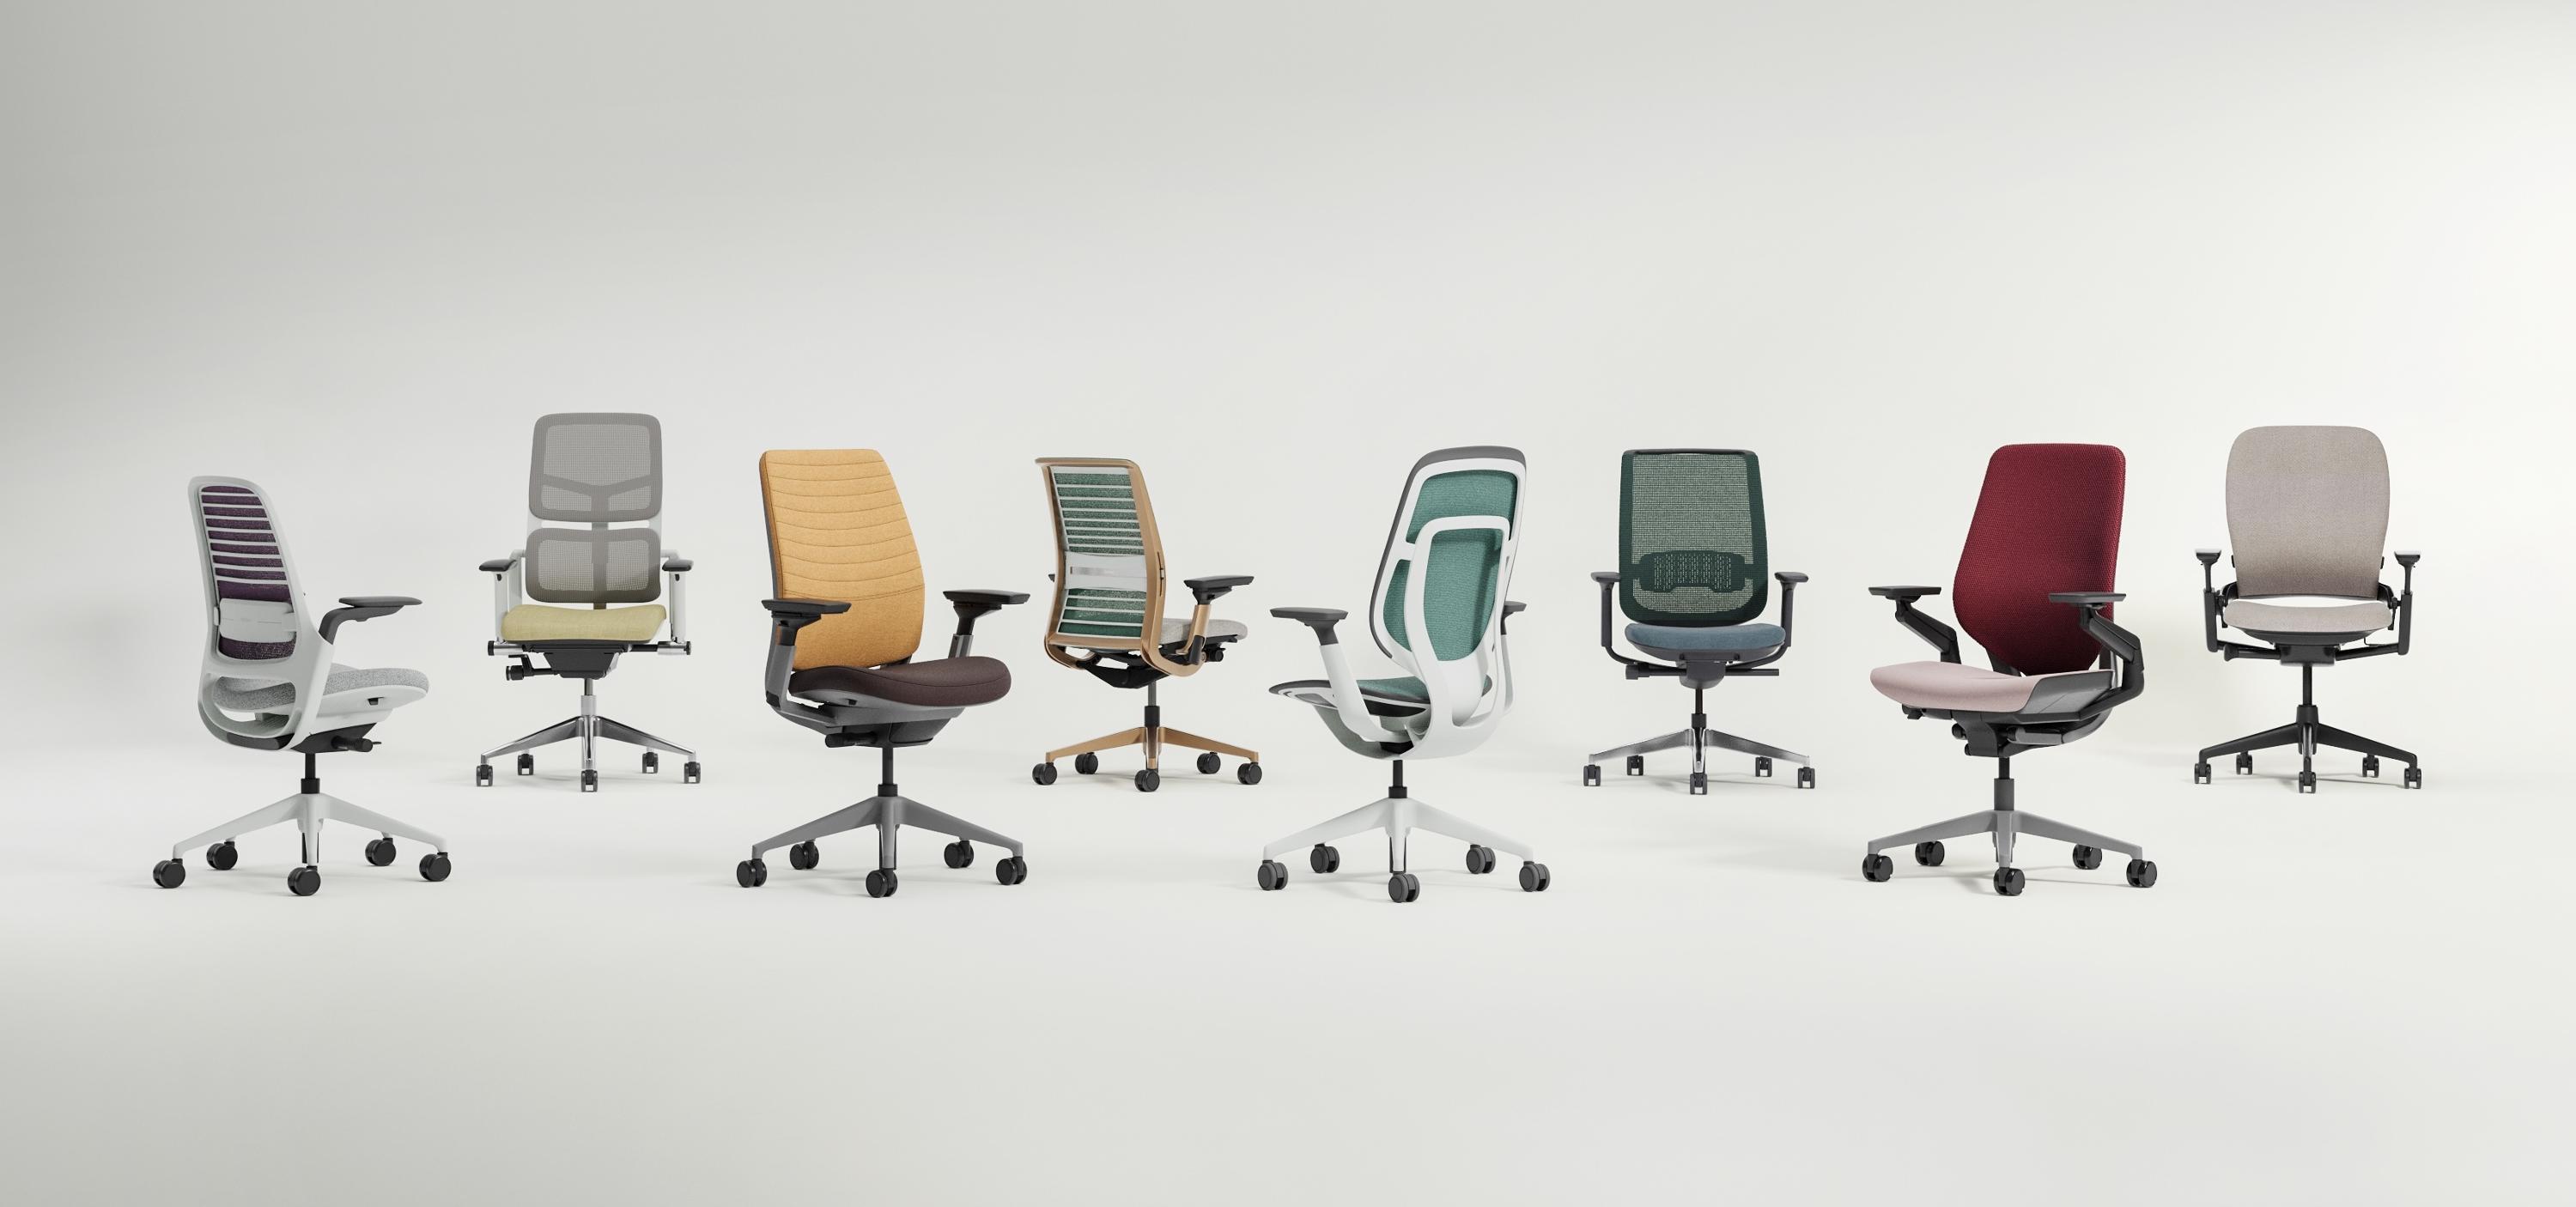 Steelcase: Human-centred seating design